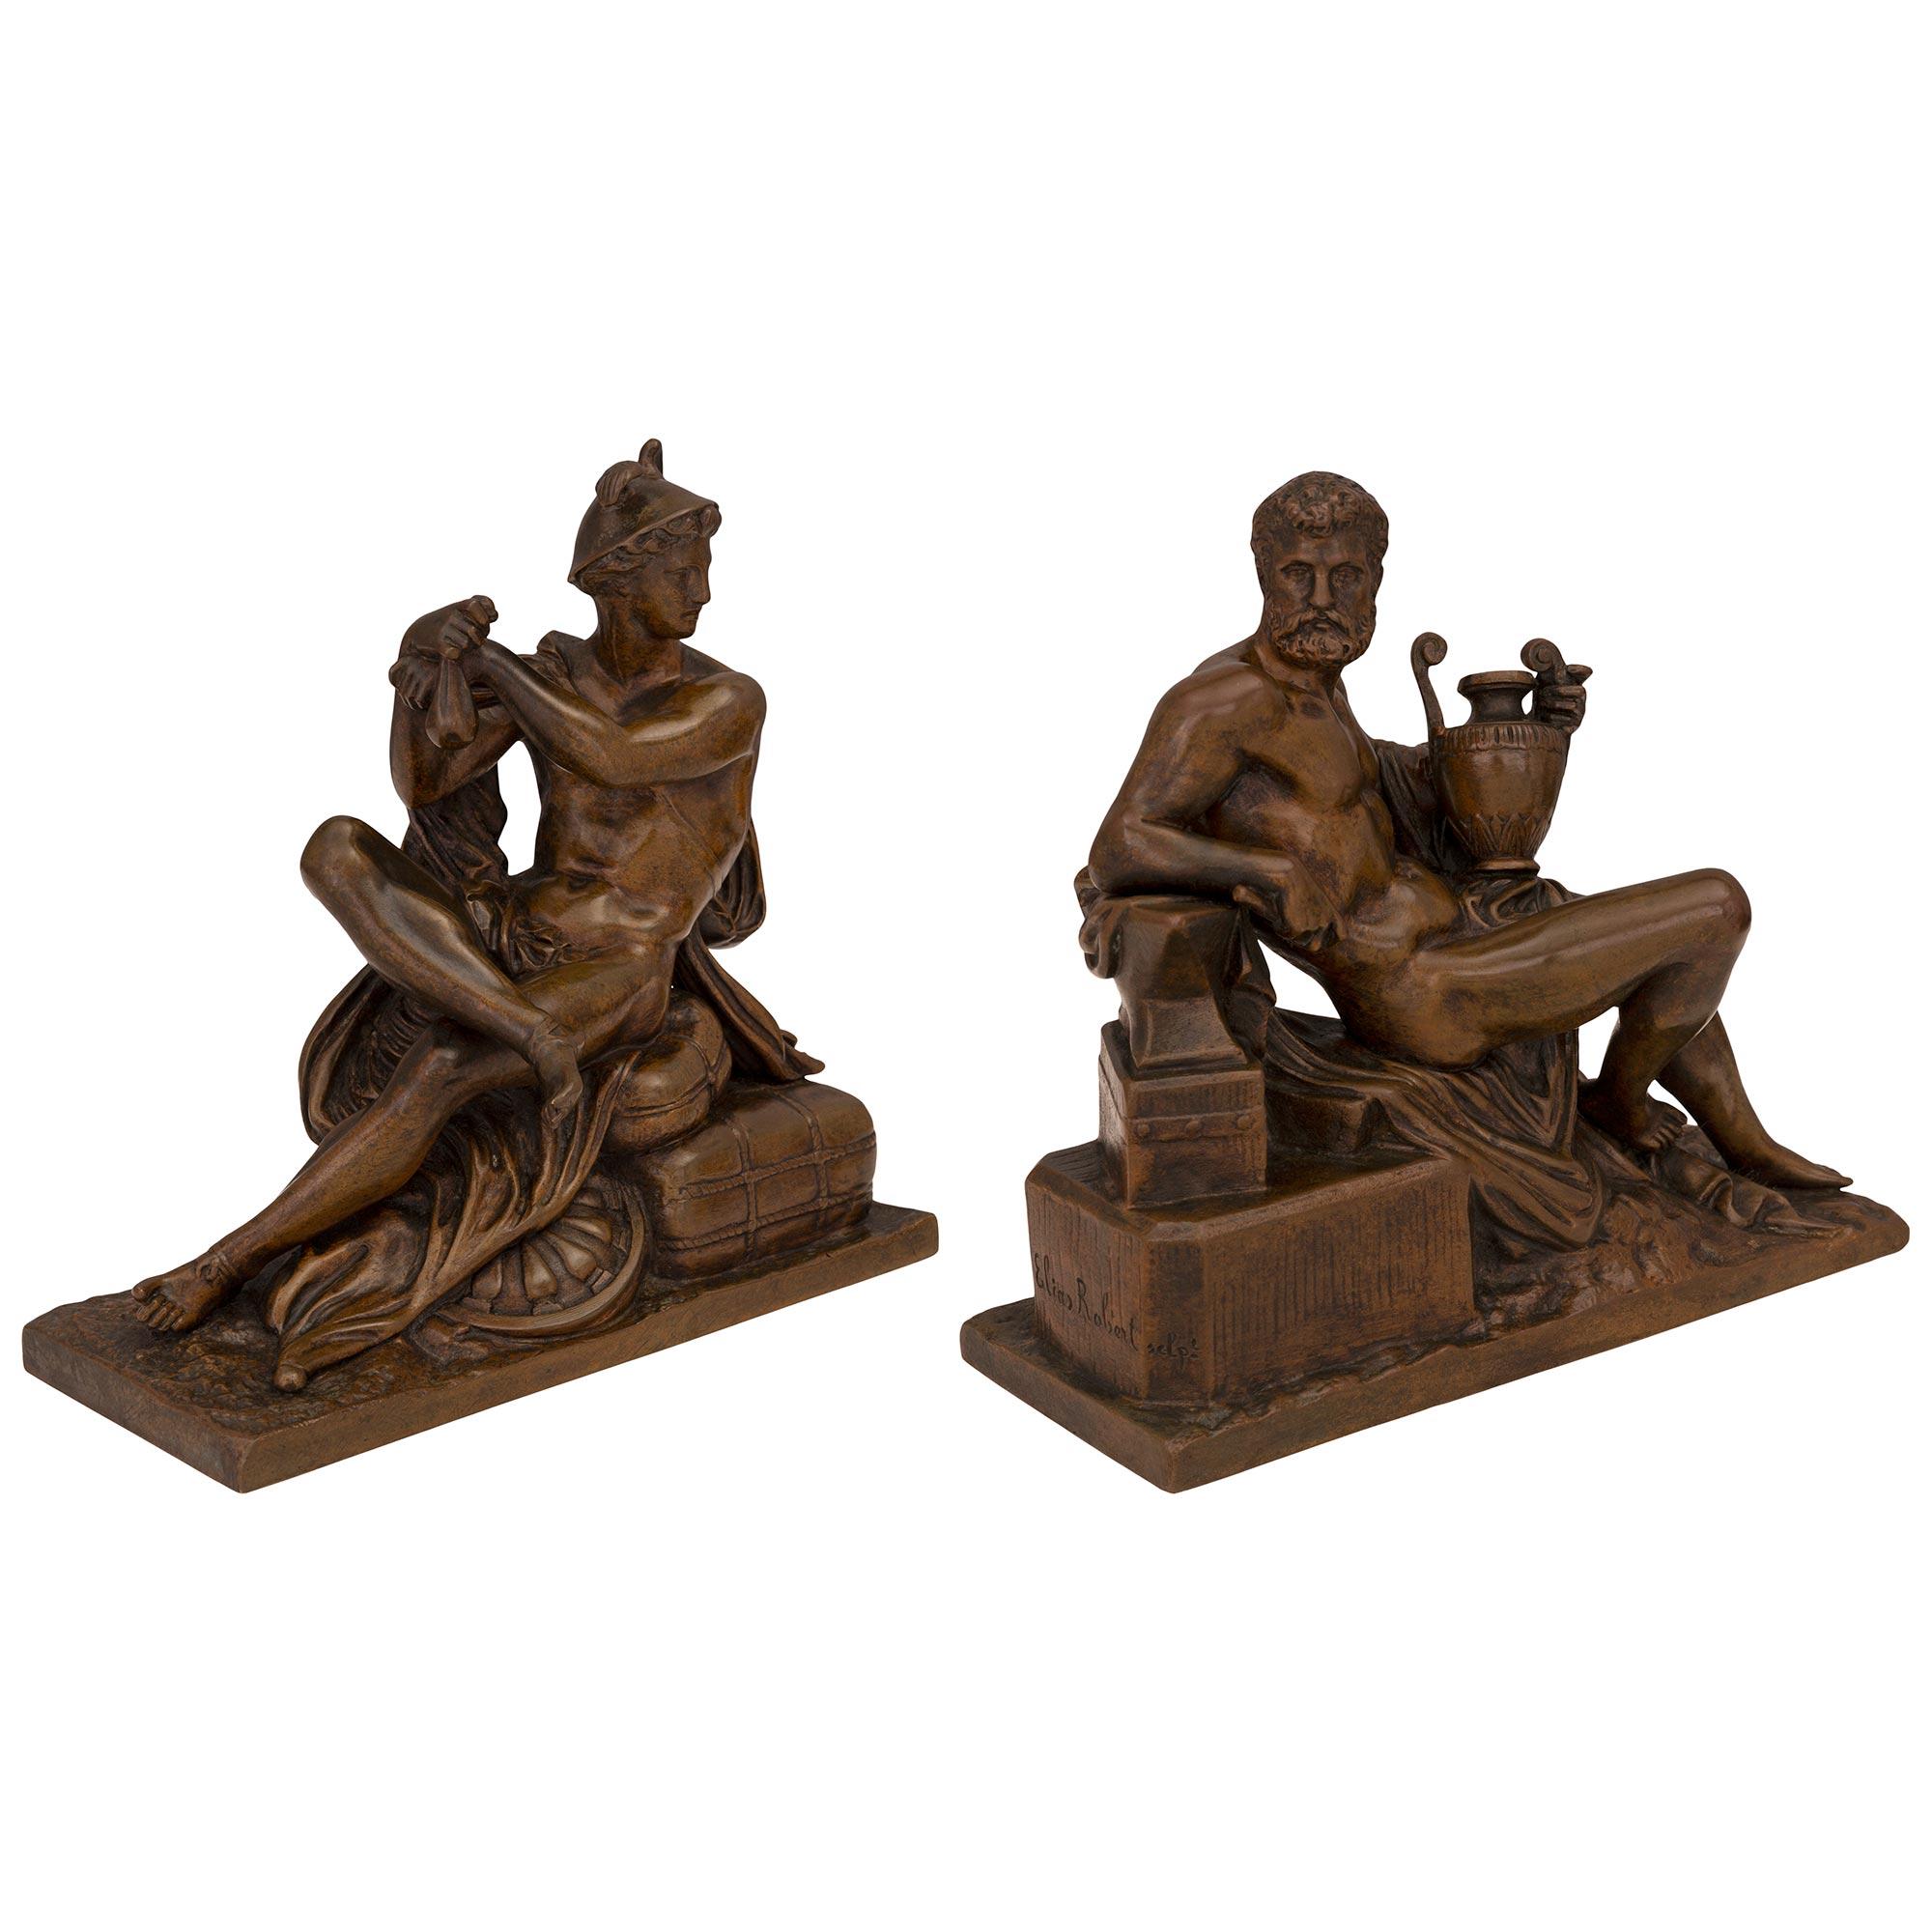 A splendid and true pair of French 19th century Neo-Classical st. patinated bronze statues of Hermes and a nobleman, signed and stamped by Susse Frères and Elias Roberts. Each statue is raised by a rectangular base with a wonderfully executed ground